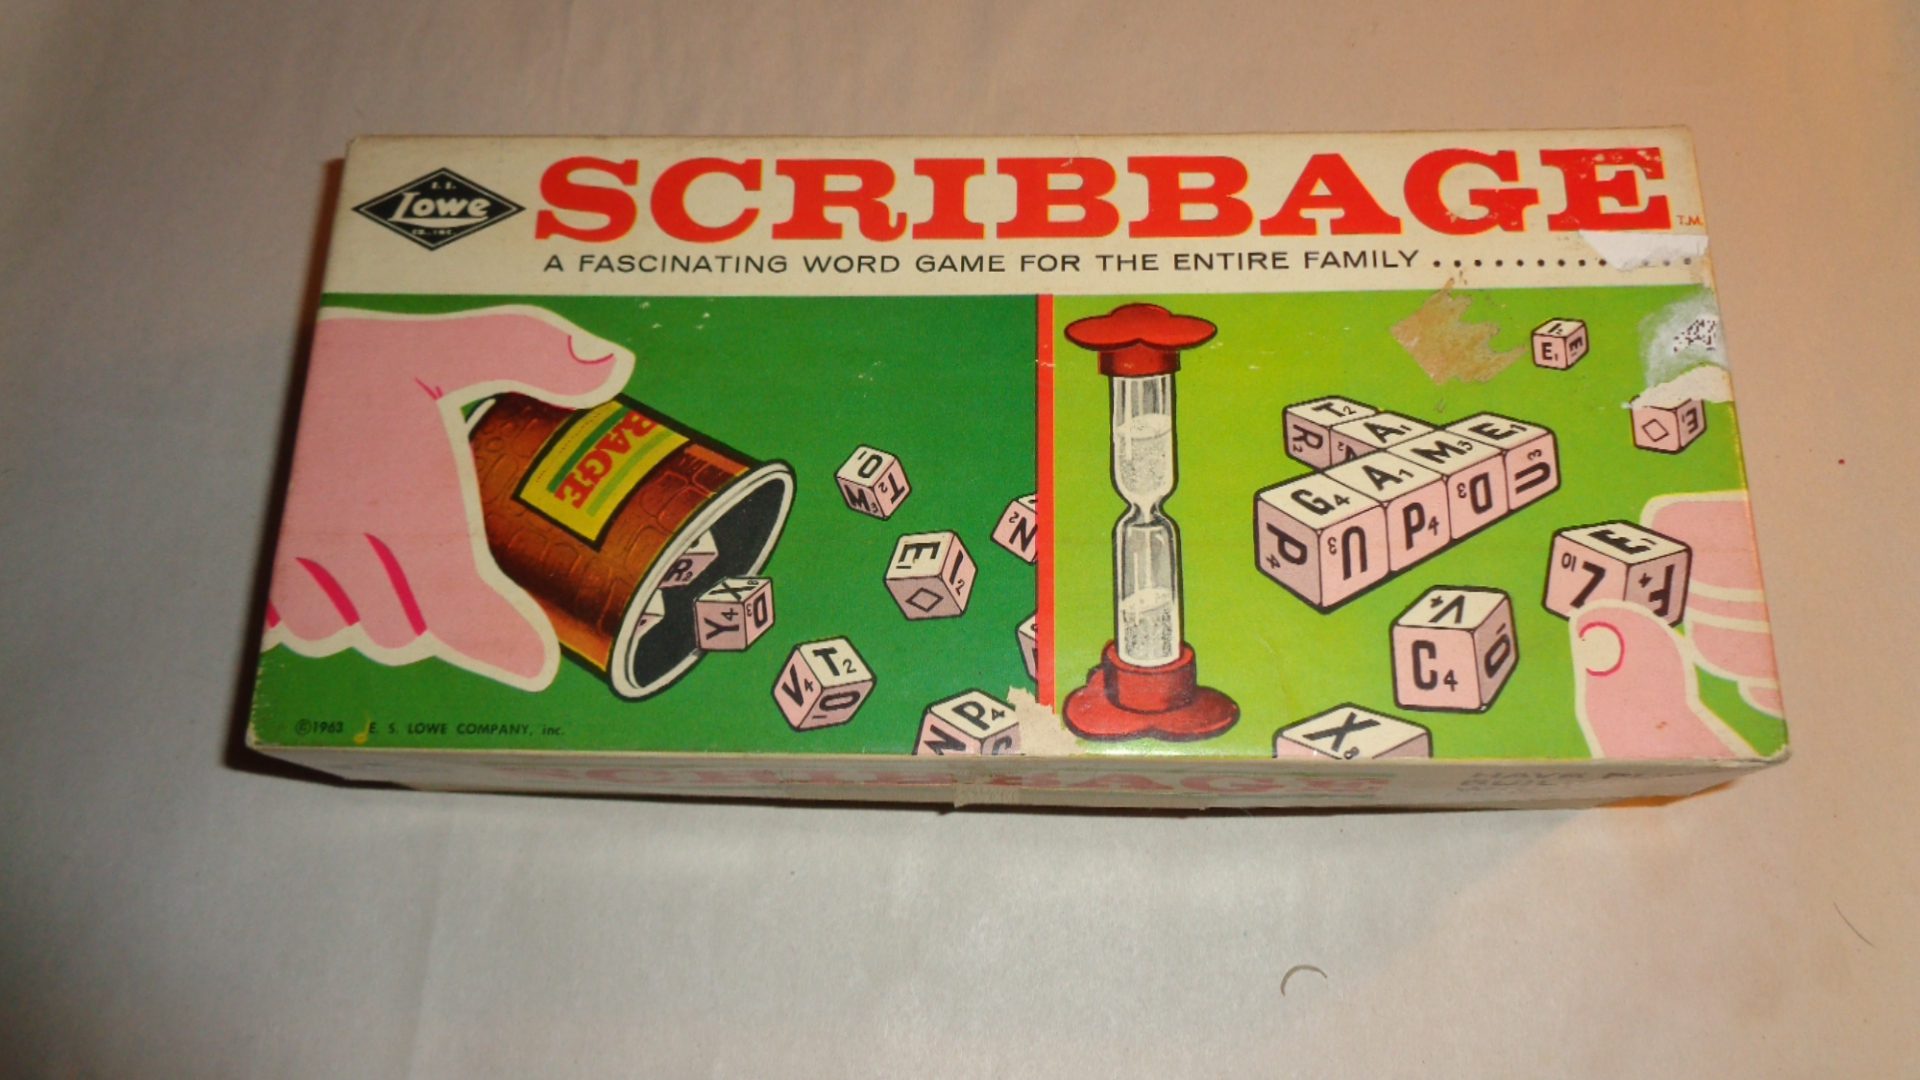 Lowe box of Scribbage word game for entire family